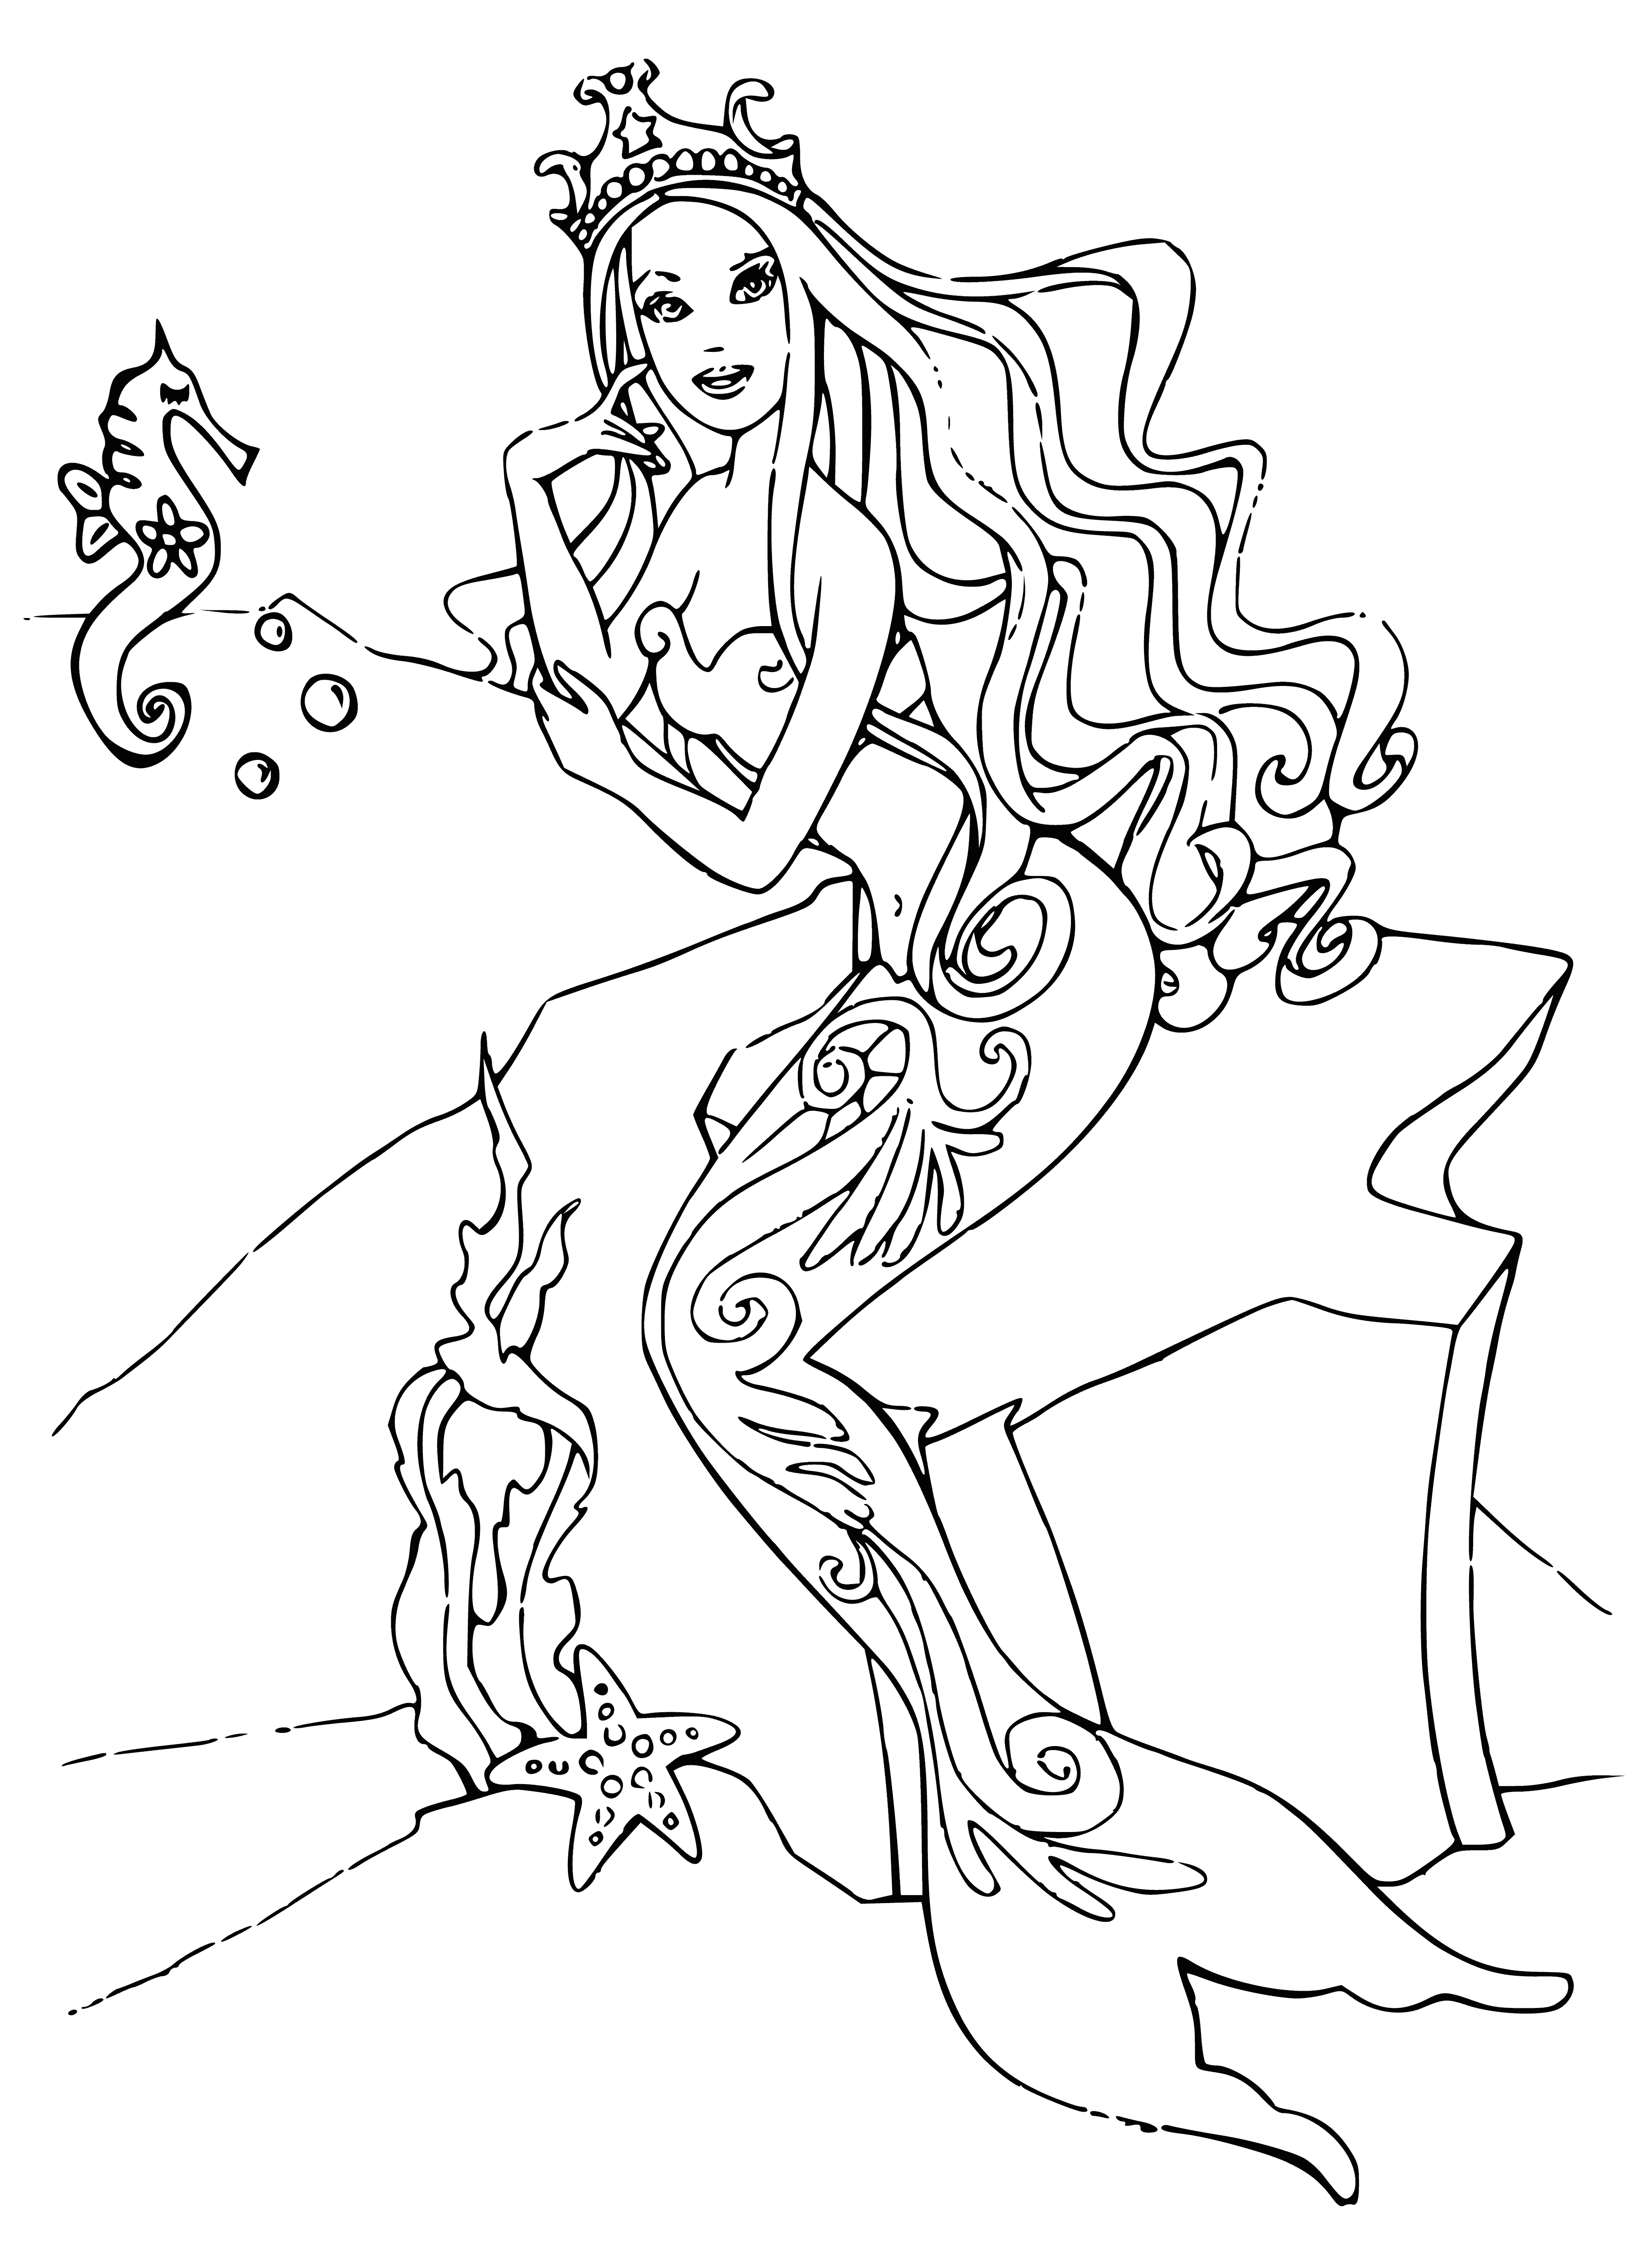 coloring page: #140char: Barbie is a mermaid ready to explore the ocean! She has a long pink dress, blonde curls & tropical accents like a bracelet & seashell in her hair.